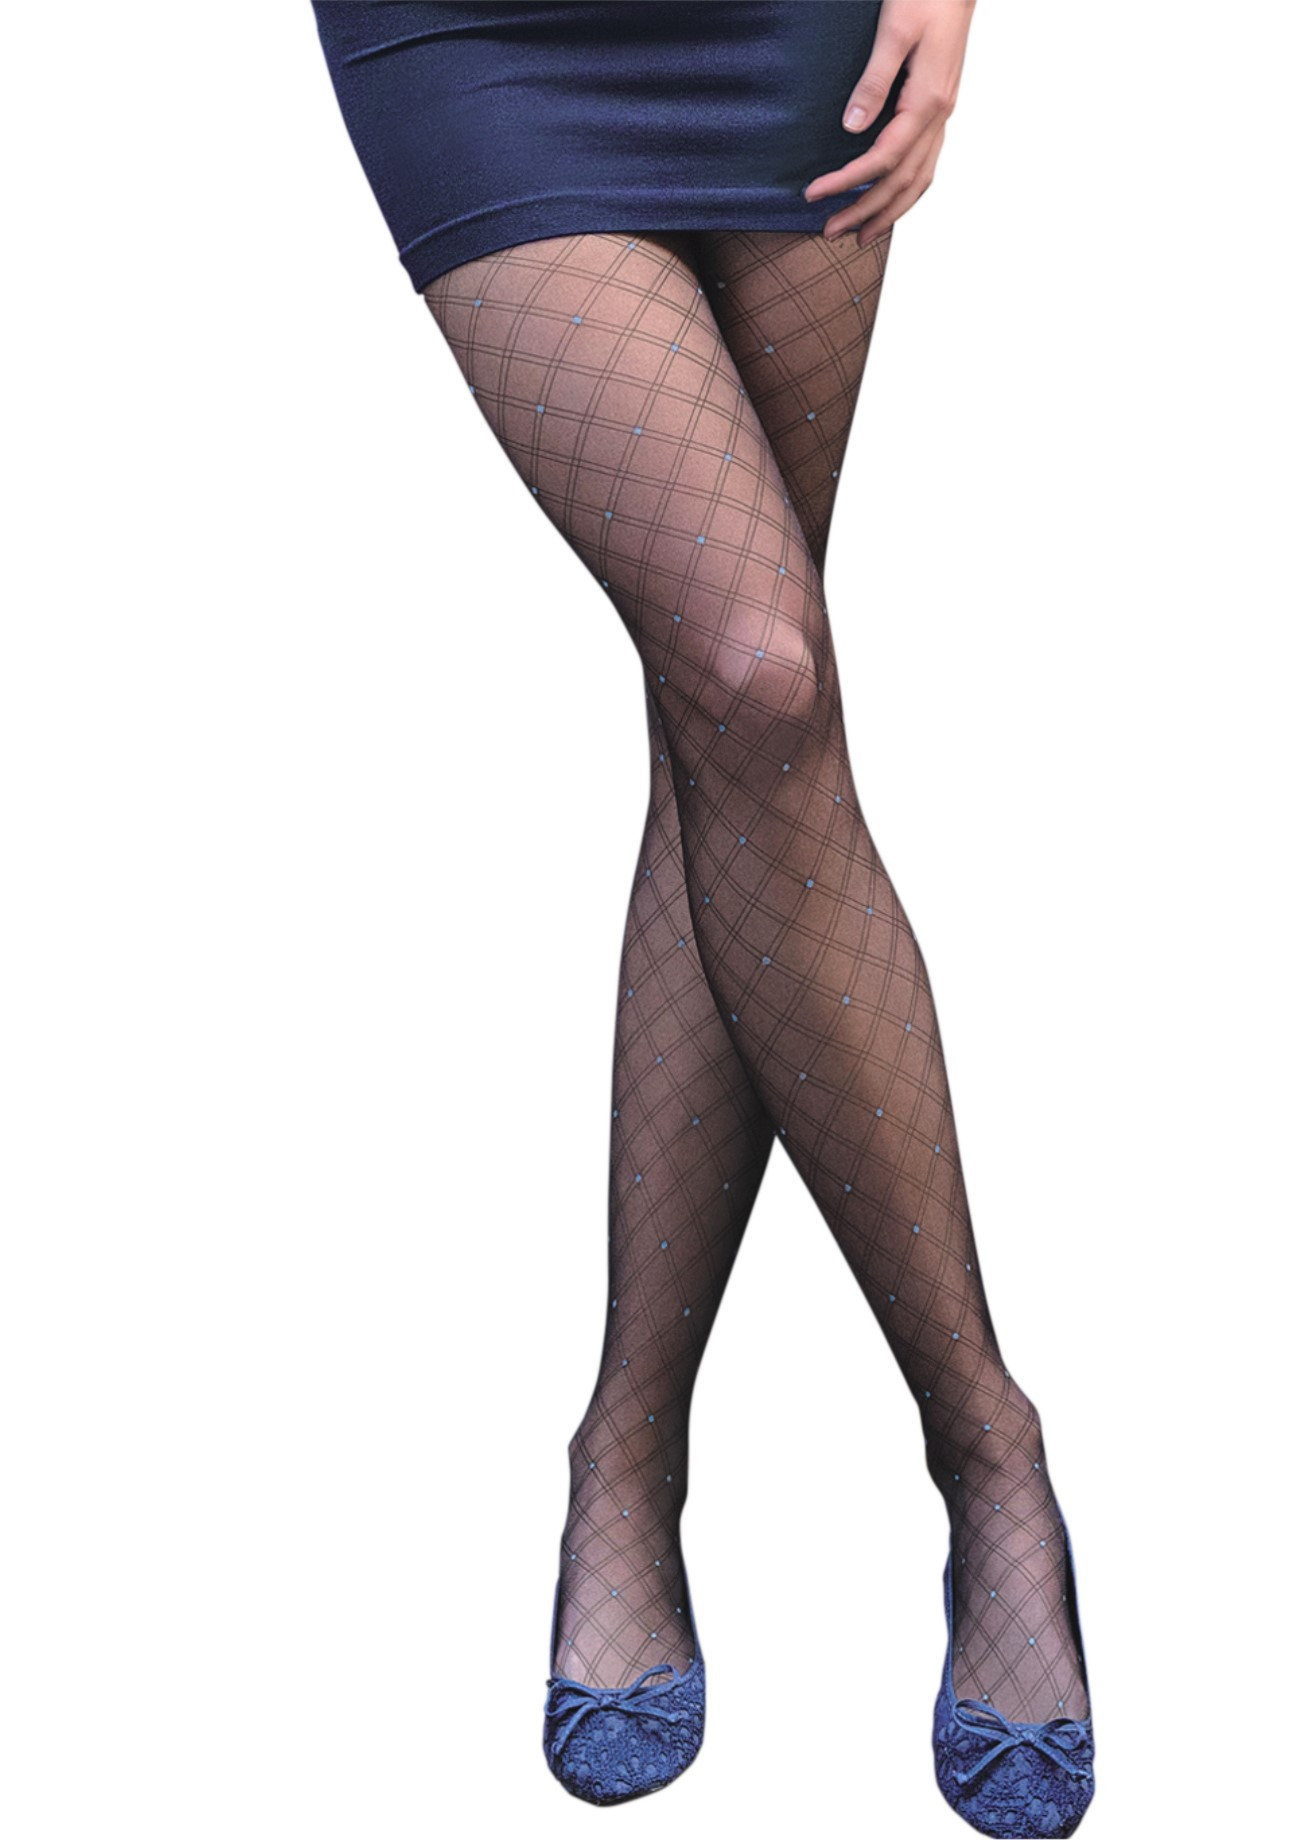 Sheer Patterned Tights with Bow and Dot Print - 20 den - SWEETY 16 - Gatta  Wear